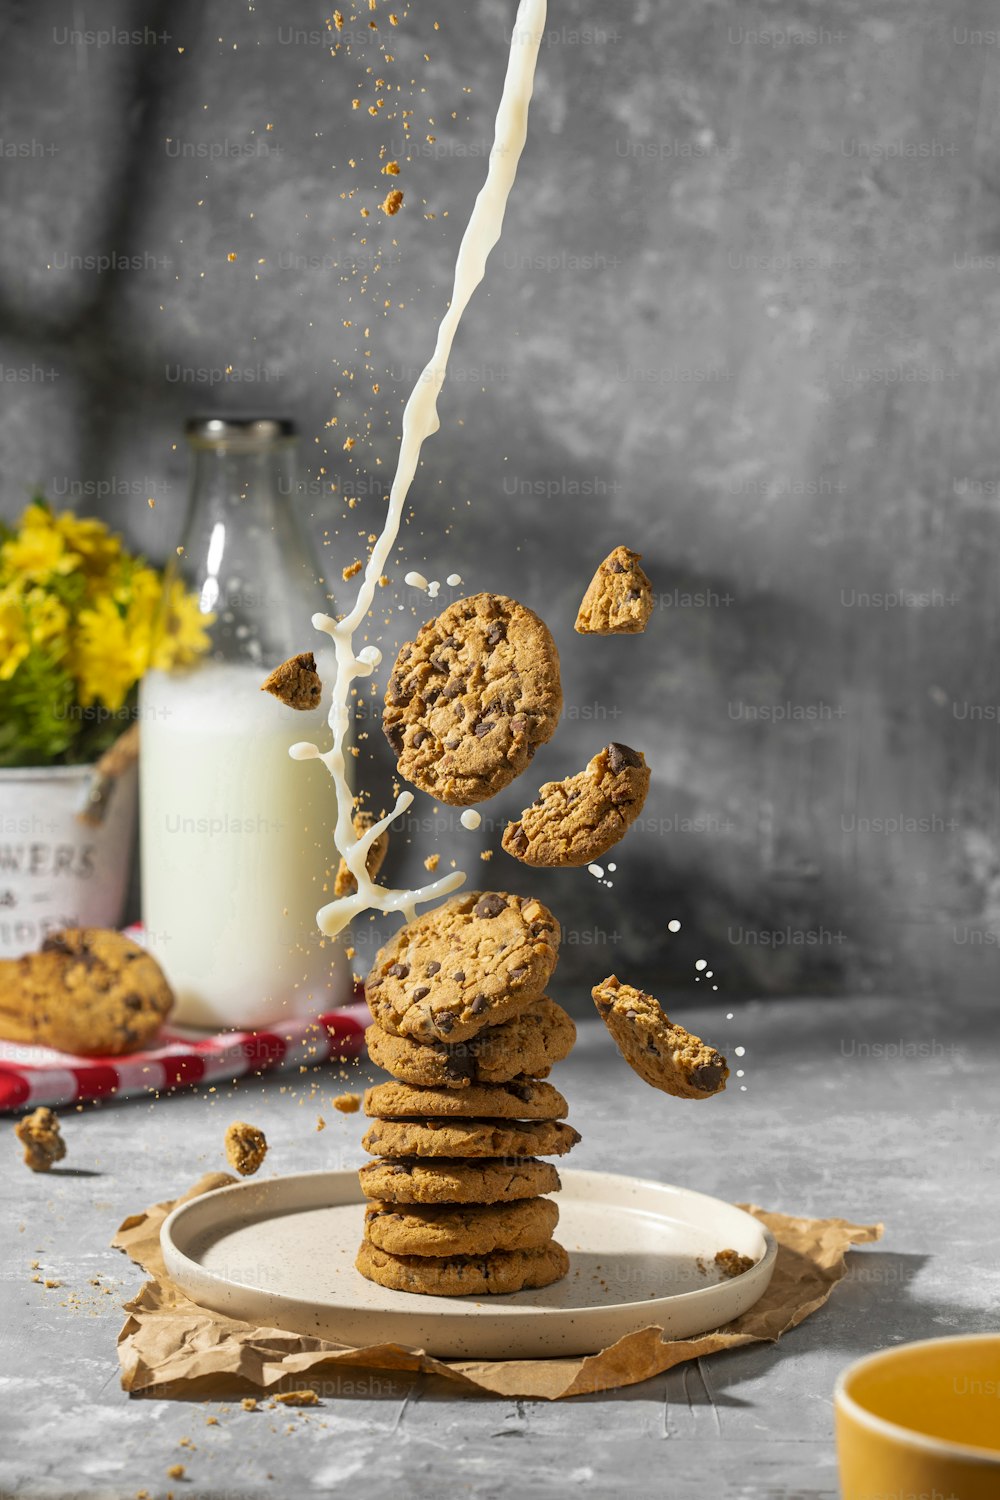 a stack of cookies falling into a glass of milk